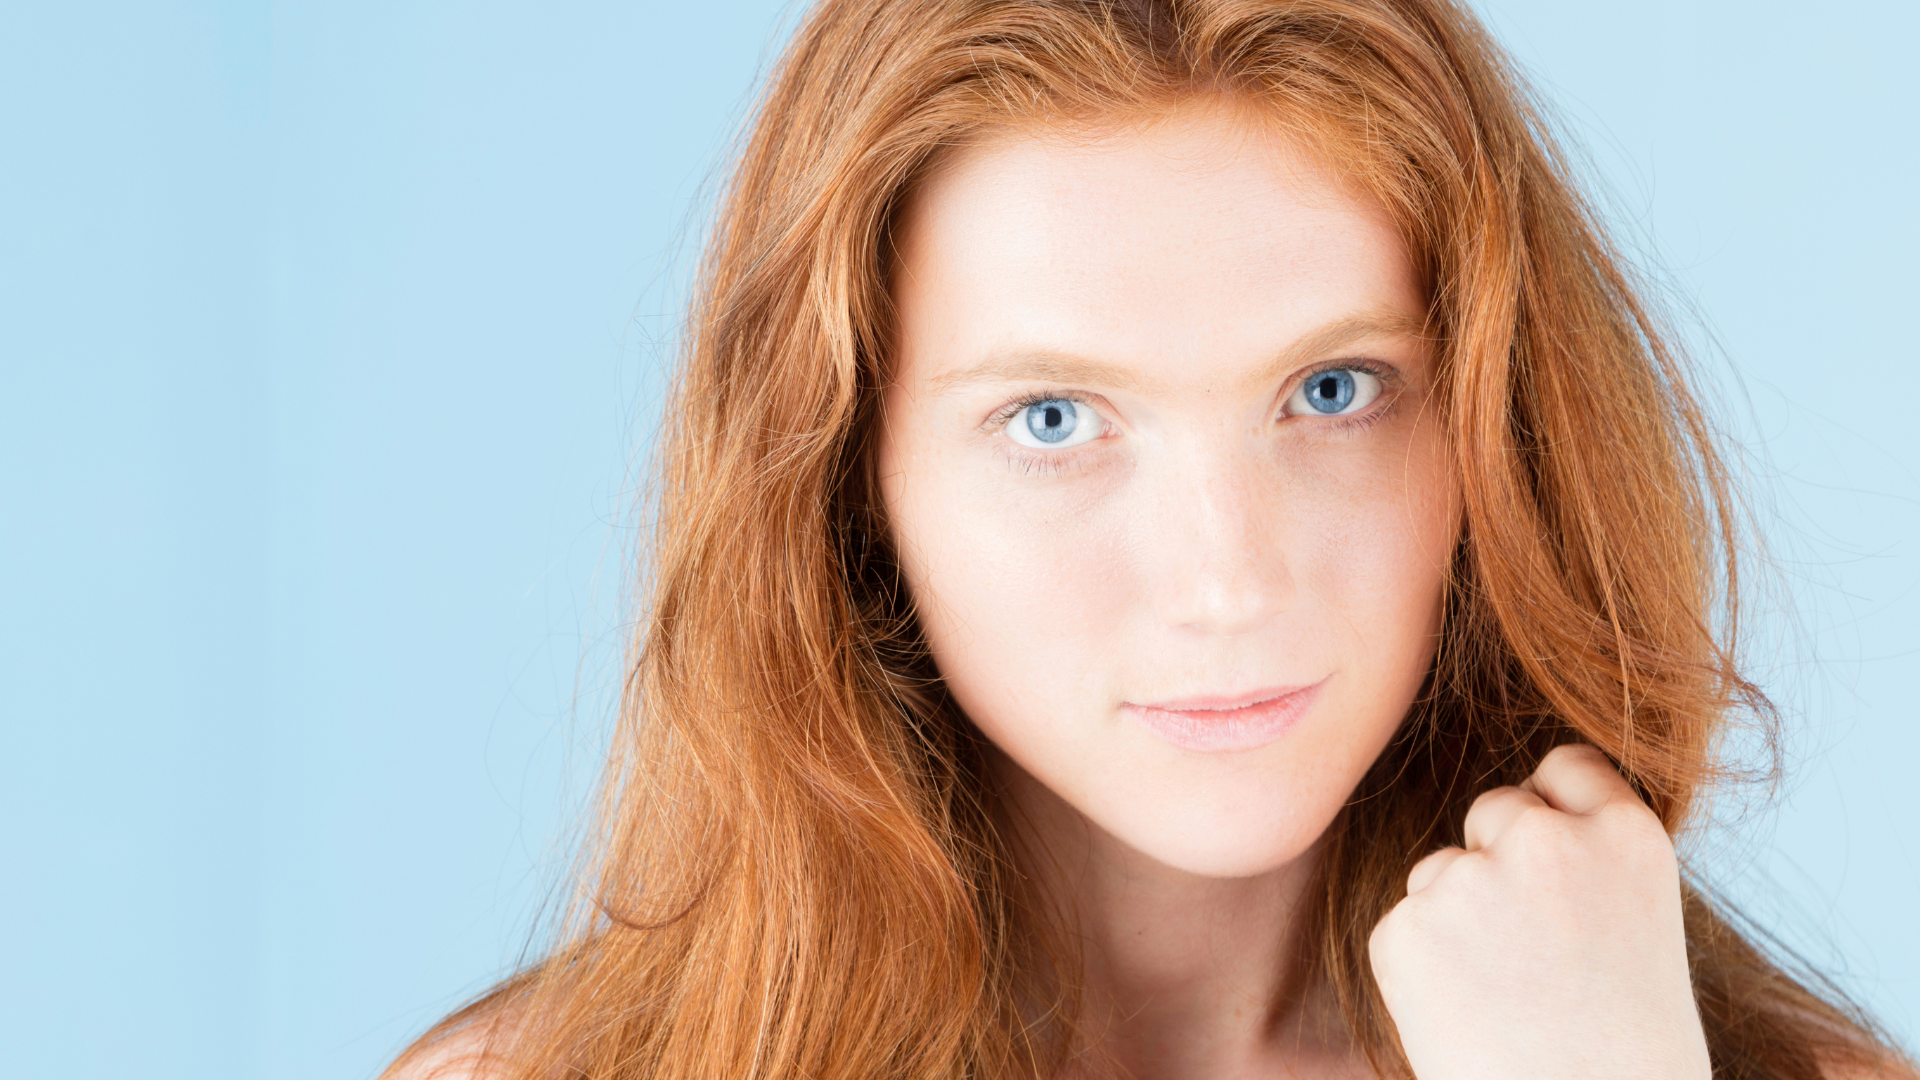 How Redheads Should Apply Leave-in Conditioner